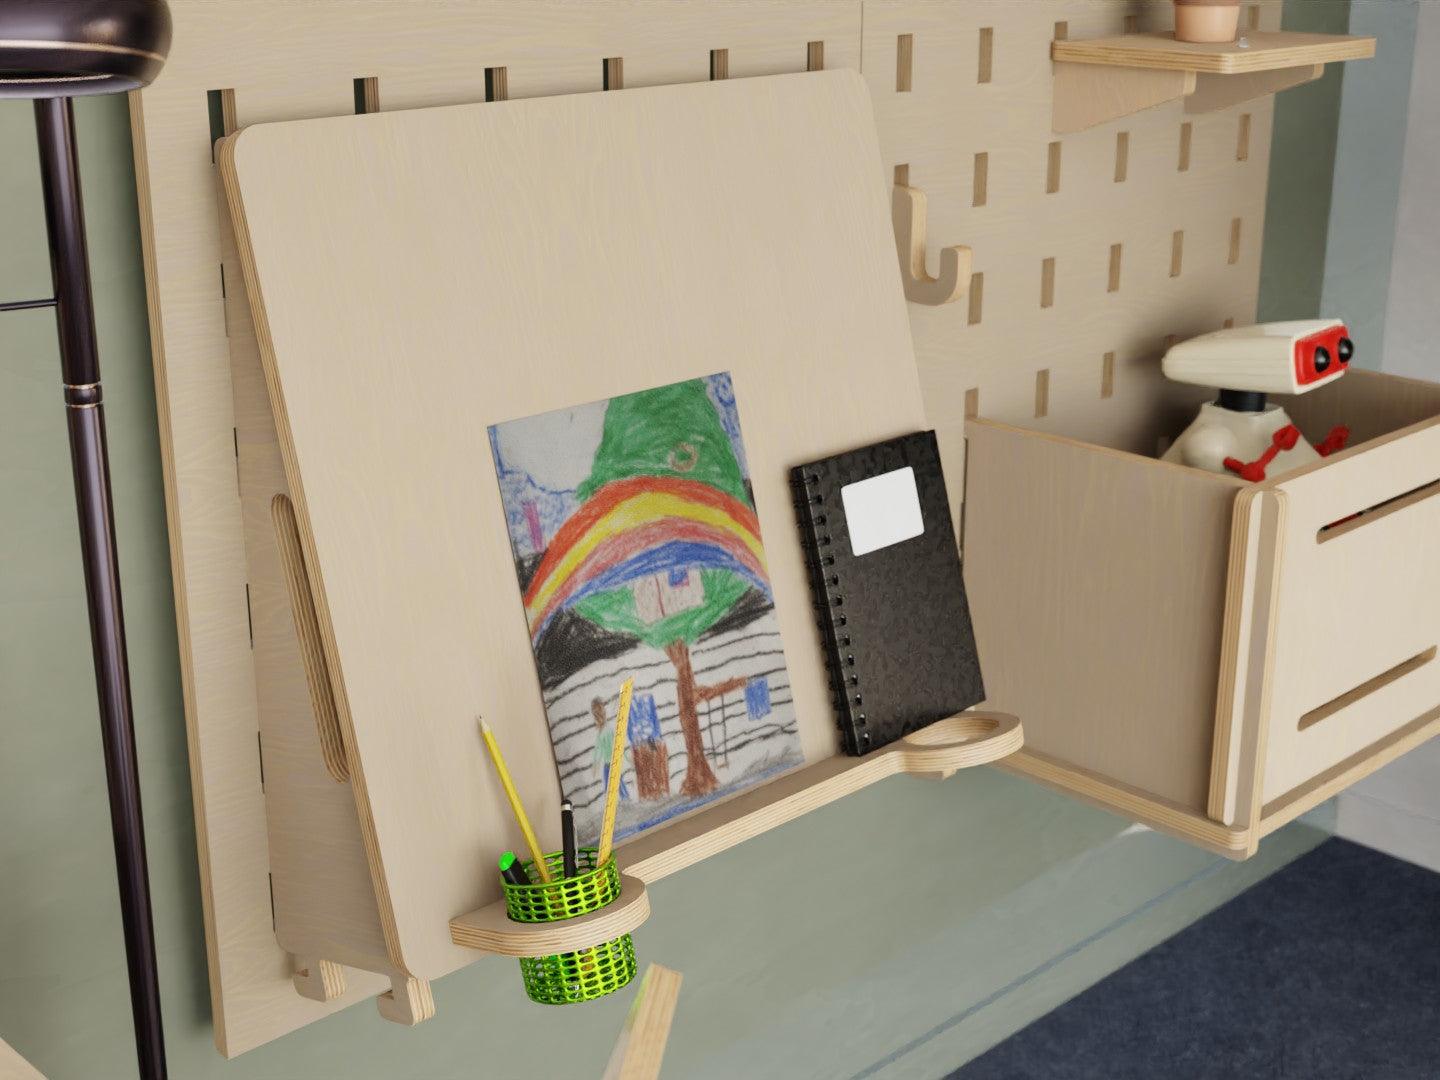 Encourage creativity with our multi-purpose easel & desk pegboard. Stylish, functional, and a true space-saver!